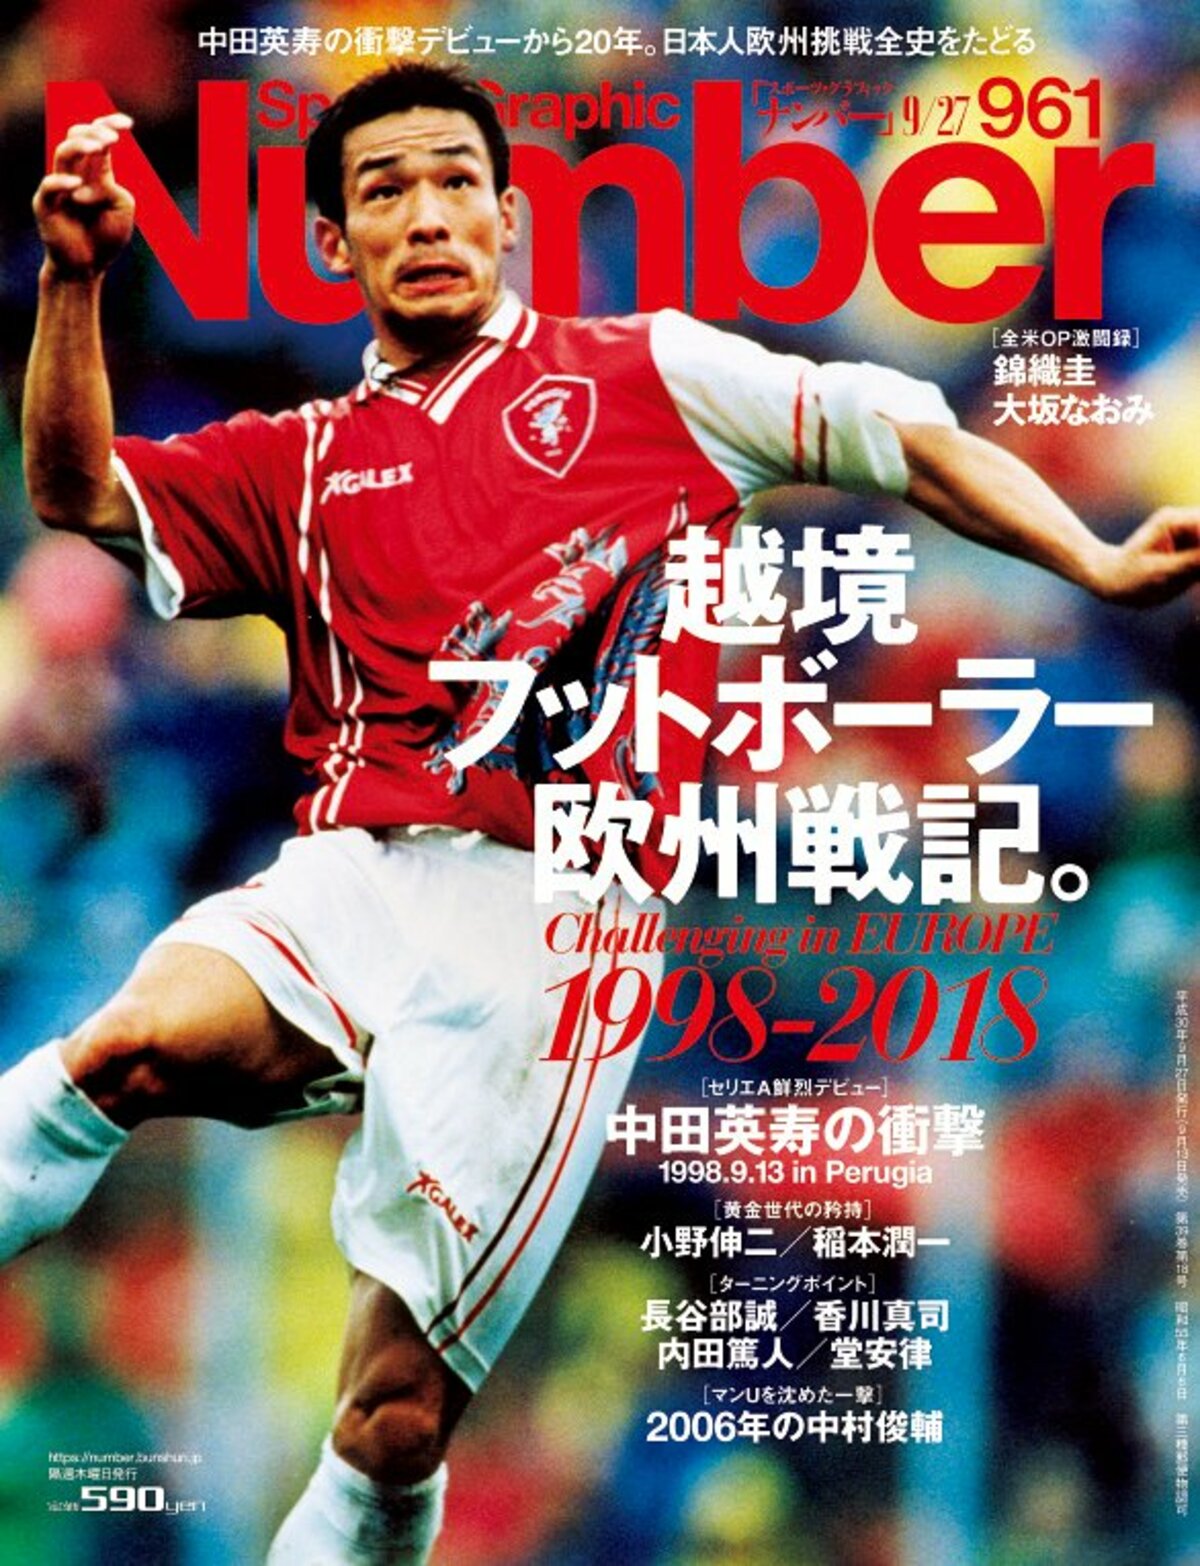 in　Web　ナンバー　EUROPE　Challenging　Number961号　Number　越境フットボーラー欧州戦記。　1998-2018